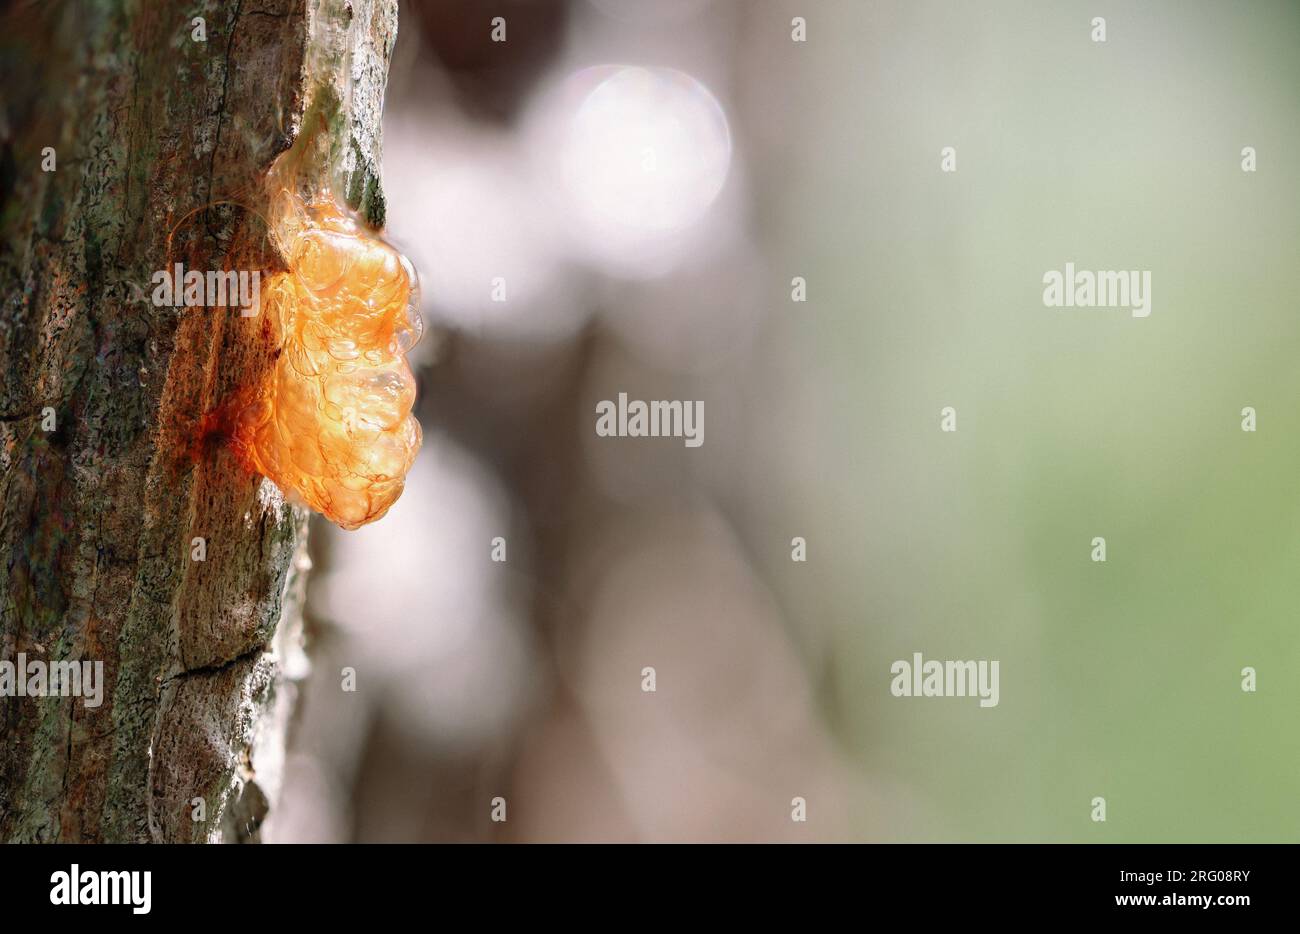 Resin / sap on the side of a tree. The sap has caught the light in an interesting way and seems to glow. It is orange / yellow. A natural phenomenon. Stock Photo